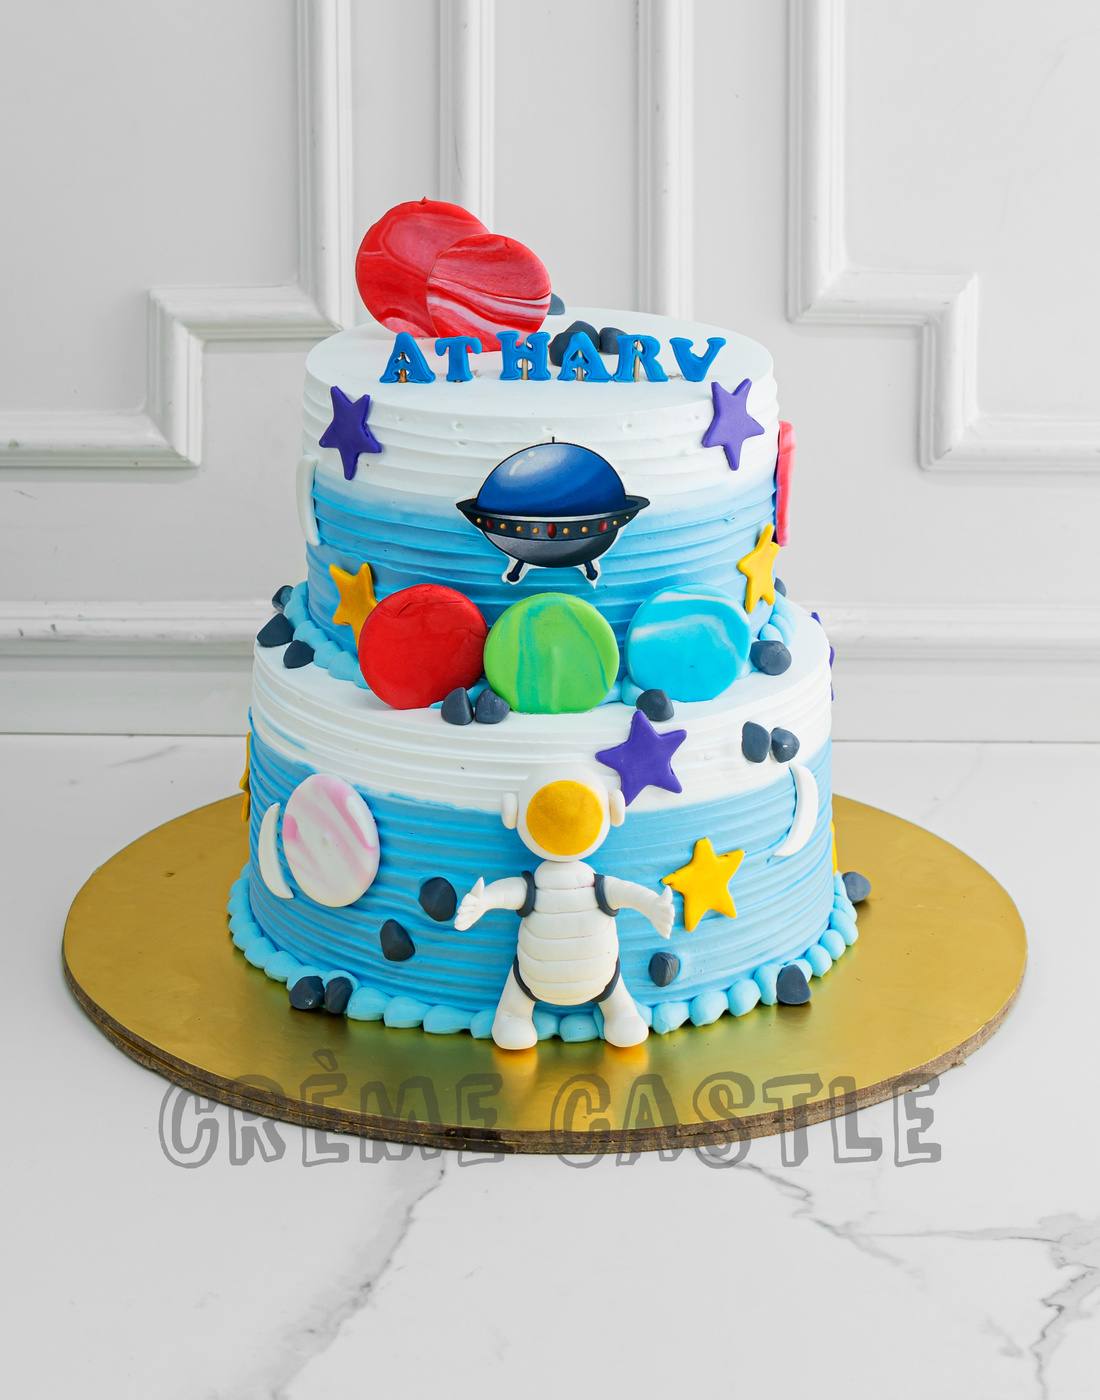 36 Space Cakes That Are Out of This World | Planet cake, Cake, Solar system  cake